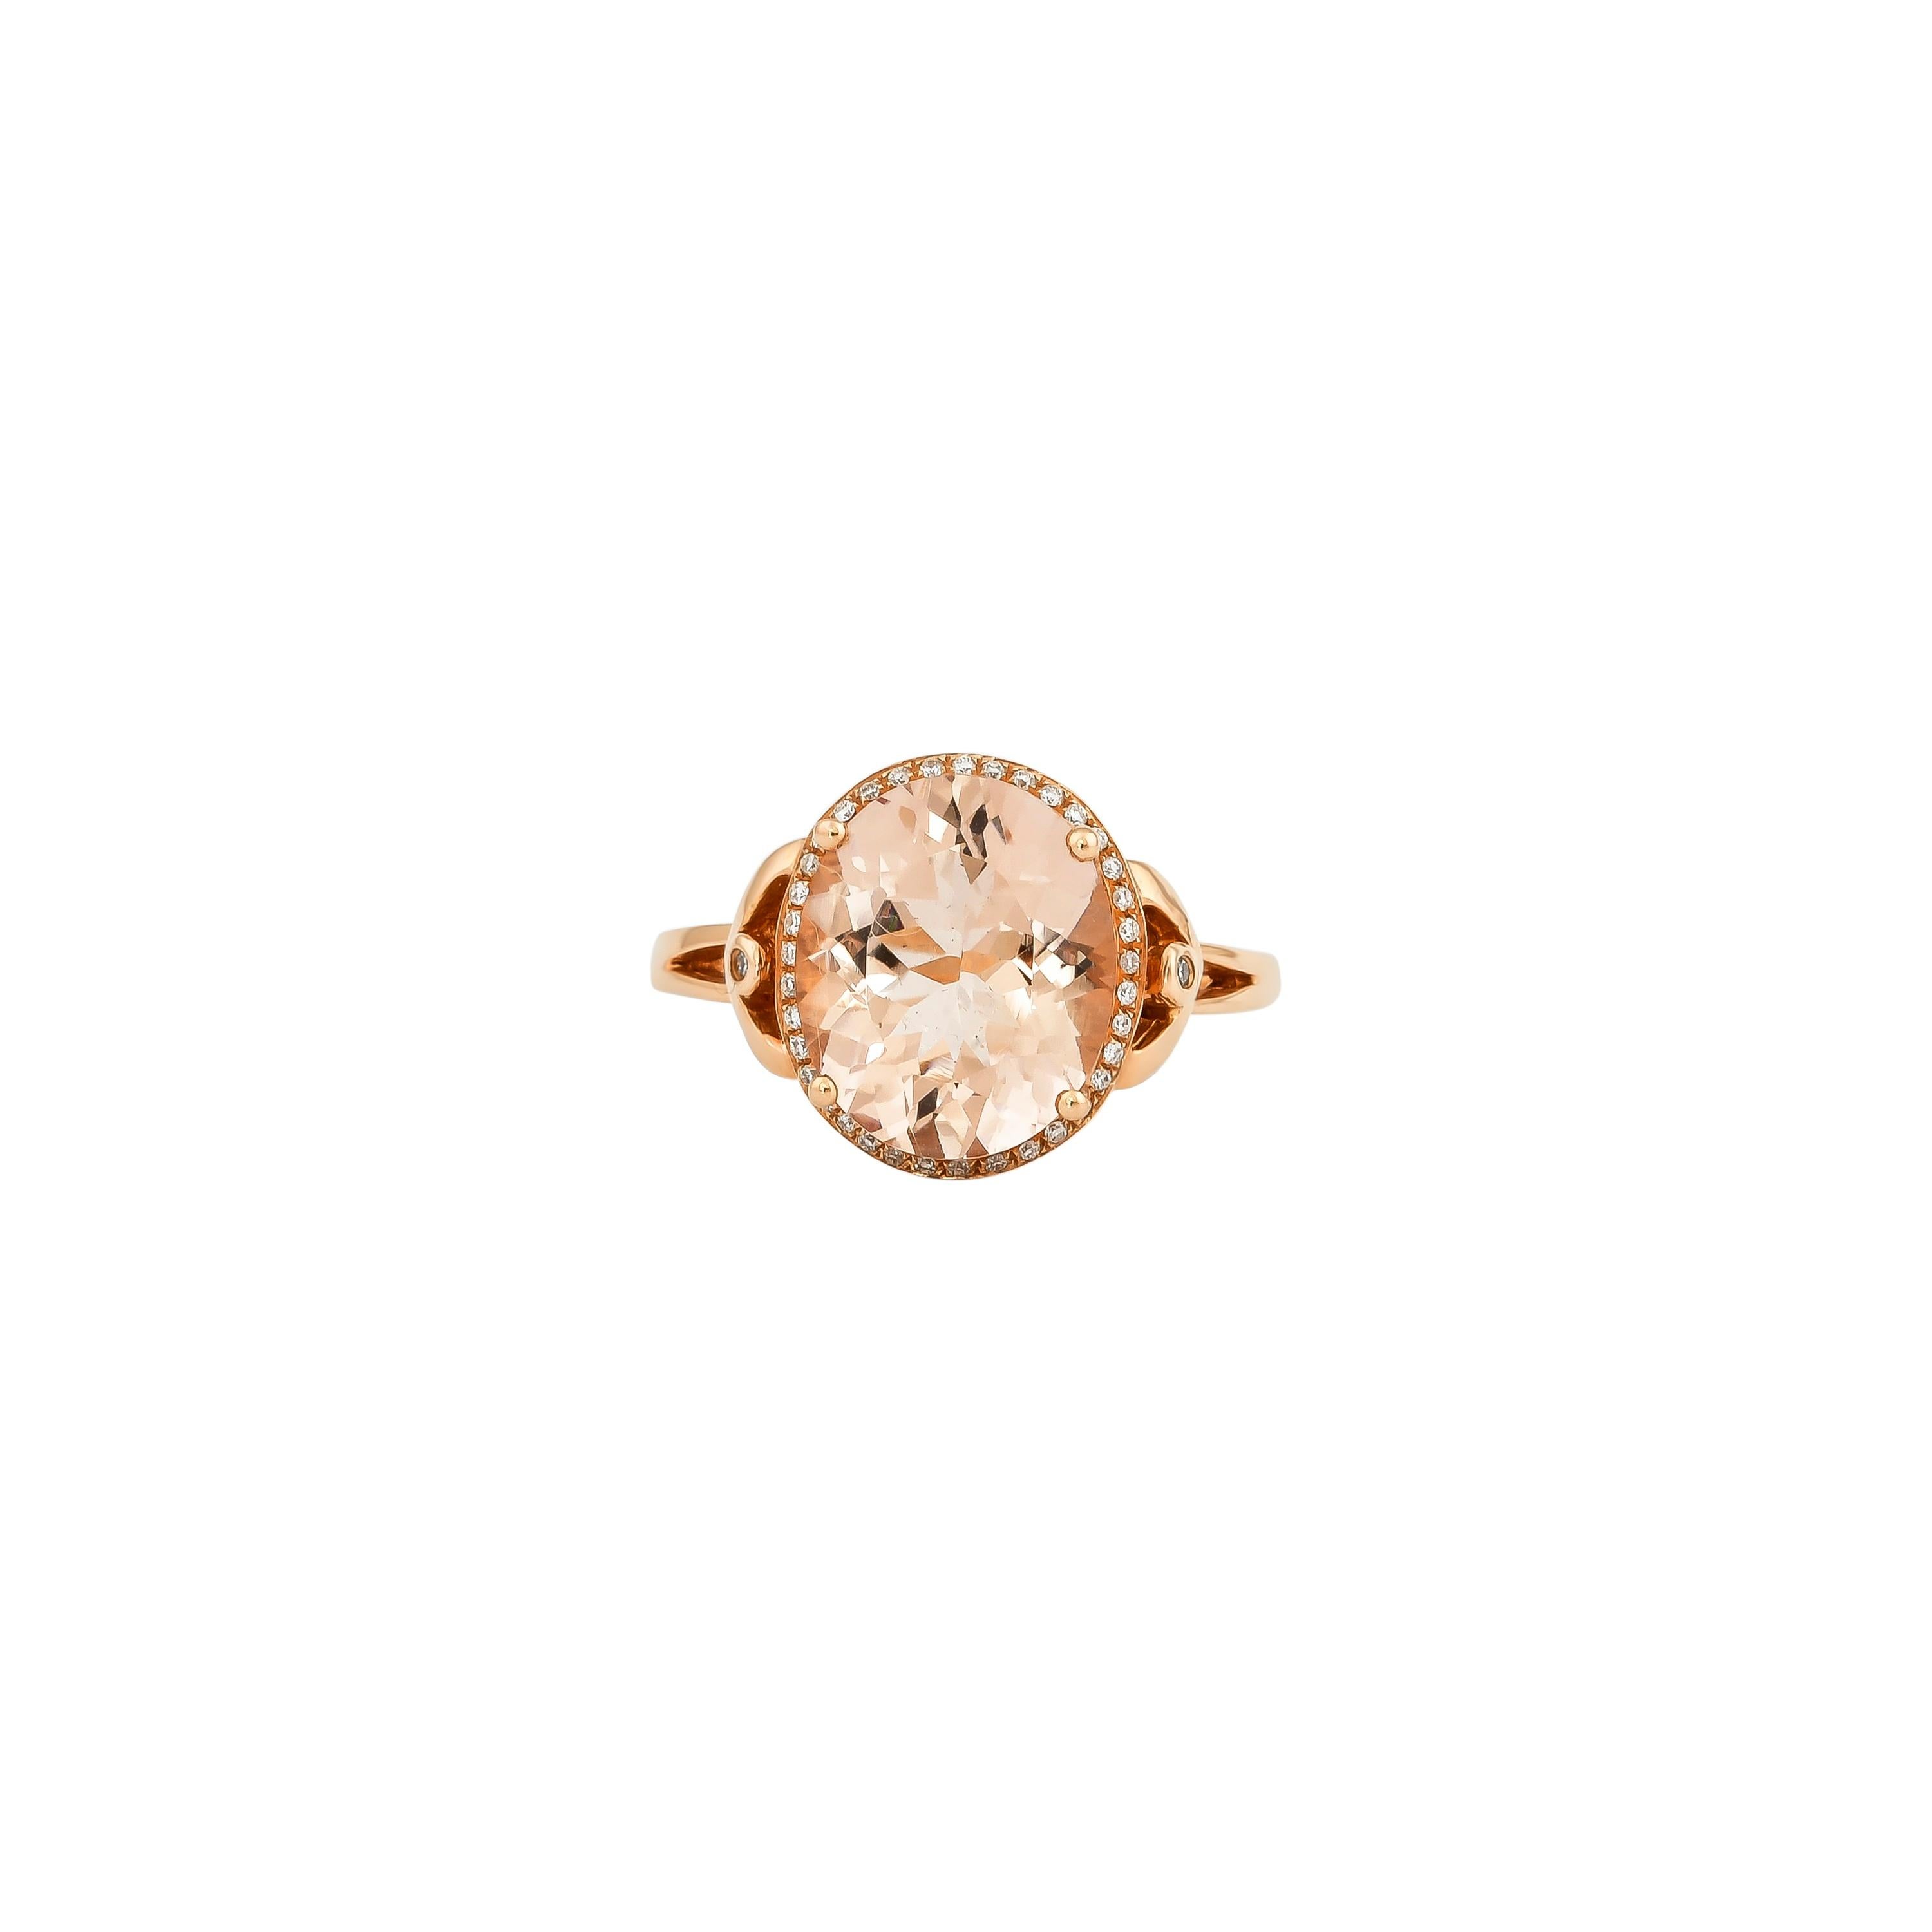 Oval Cut 3.9 Carat Morganite Ring in 18 Karat Rose Gold with Diamond For Sale